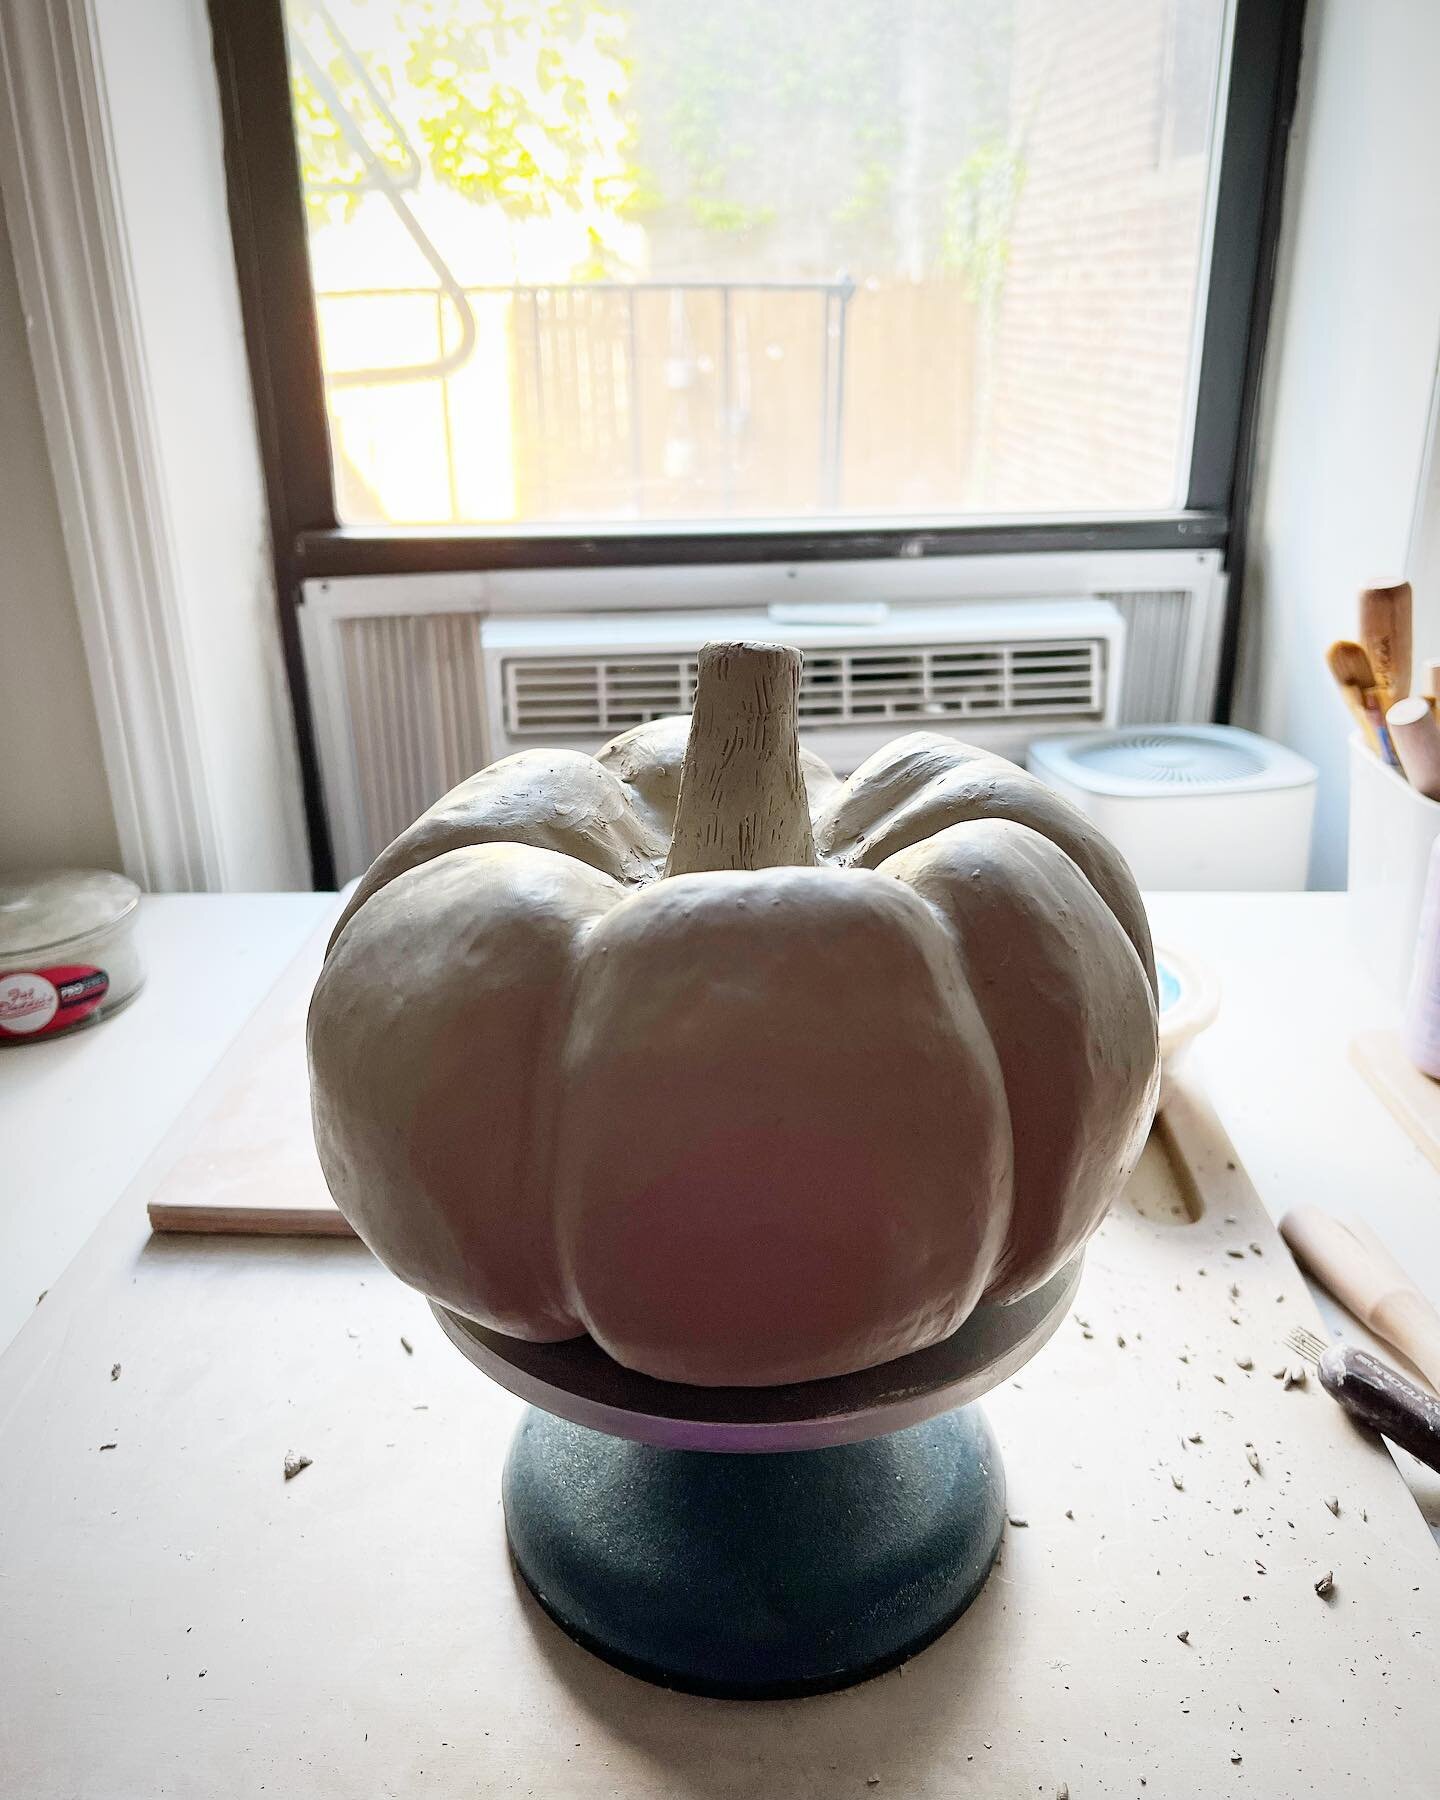 I thiiiiiinkkkk I may start adding pumpkins to my regular making repertoire? Feels v on brand for me. 🤨

This gal will be bisqued and brought to Connecticut in June for a Raku firing. 

#ceramicsculpture #ceramicpumpkin #claysculpture #brooklynartis